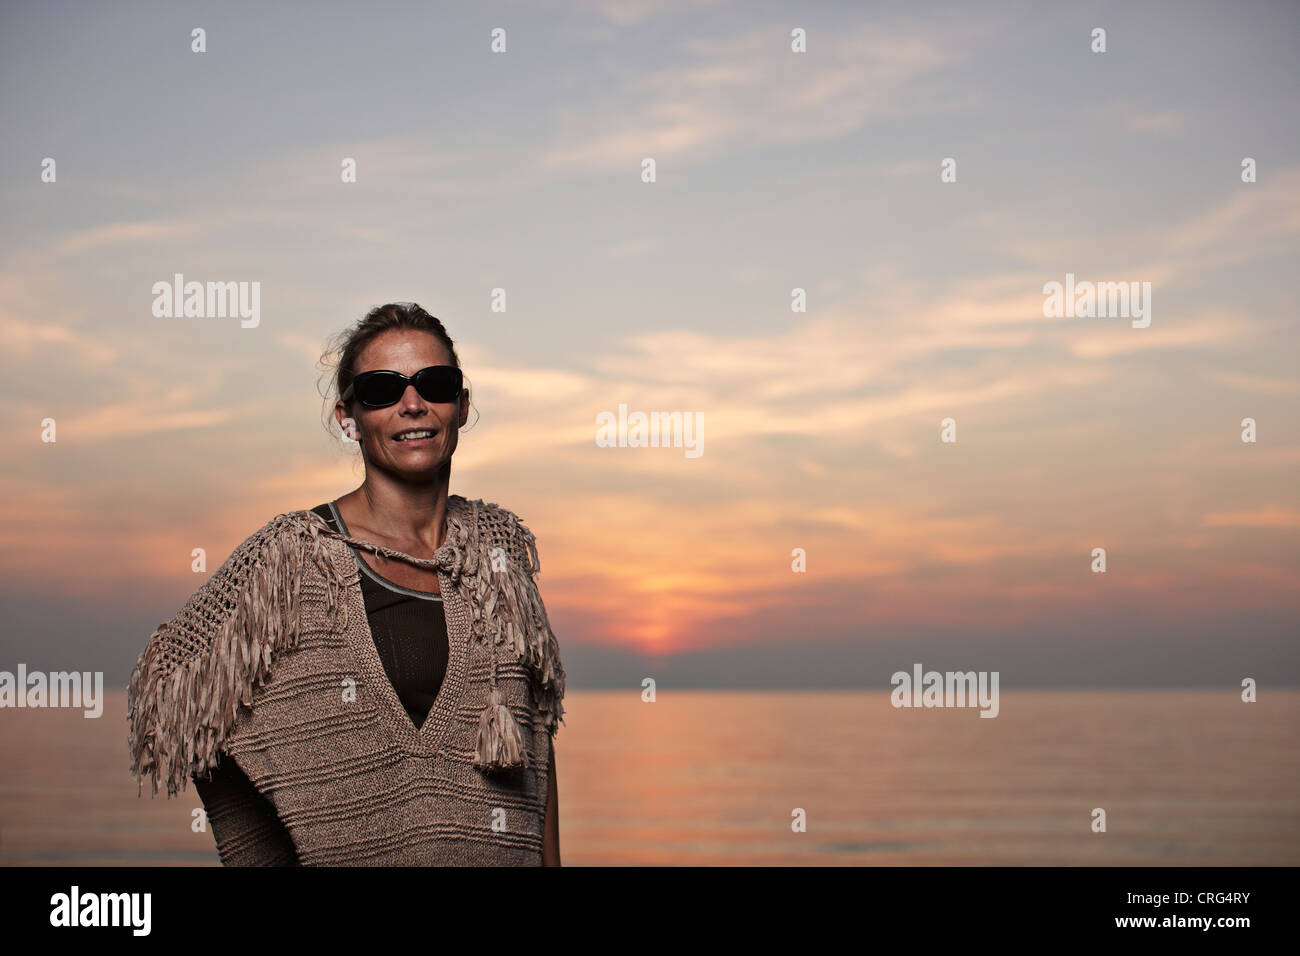 Woman standing on beach at sunset Banque D'Images